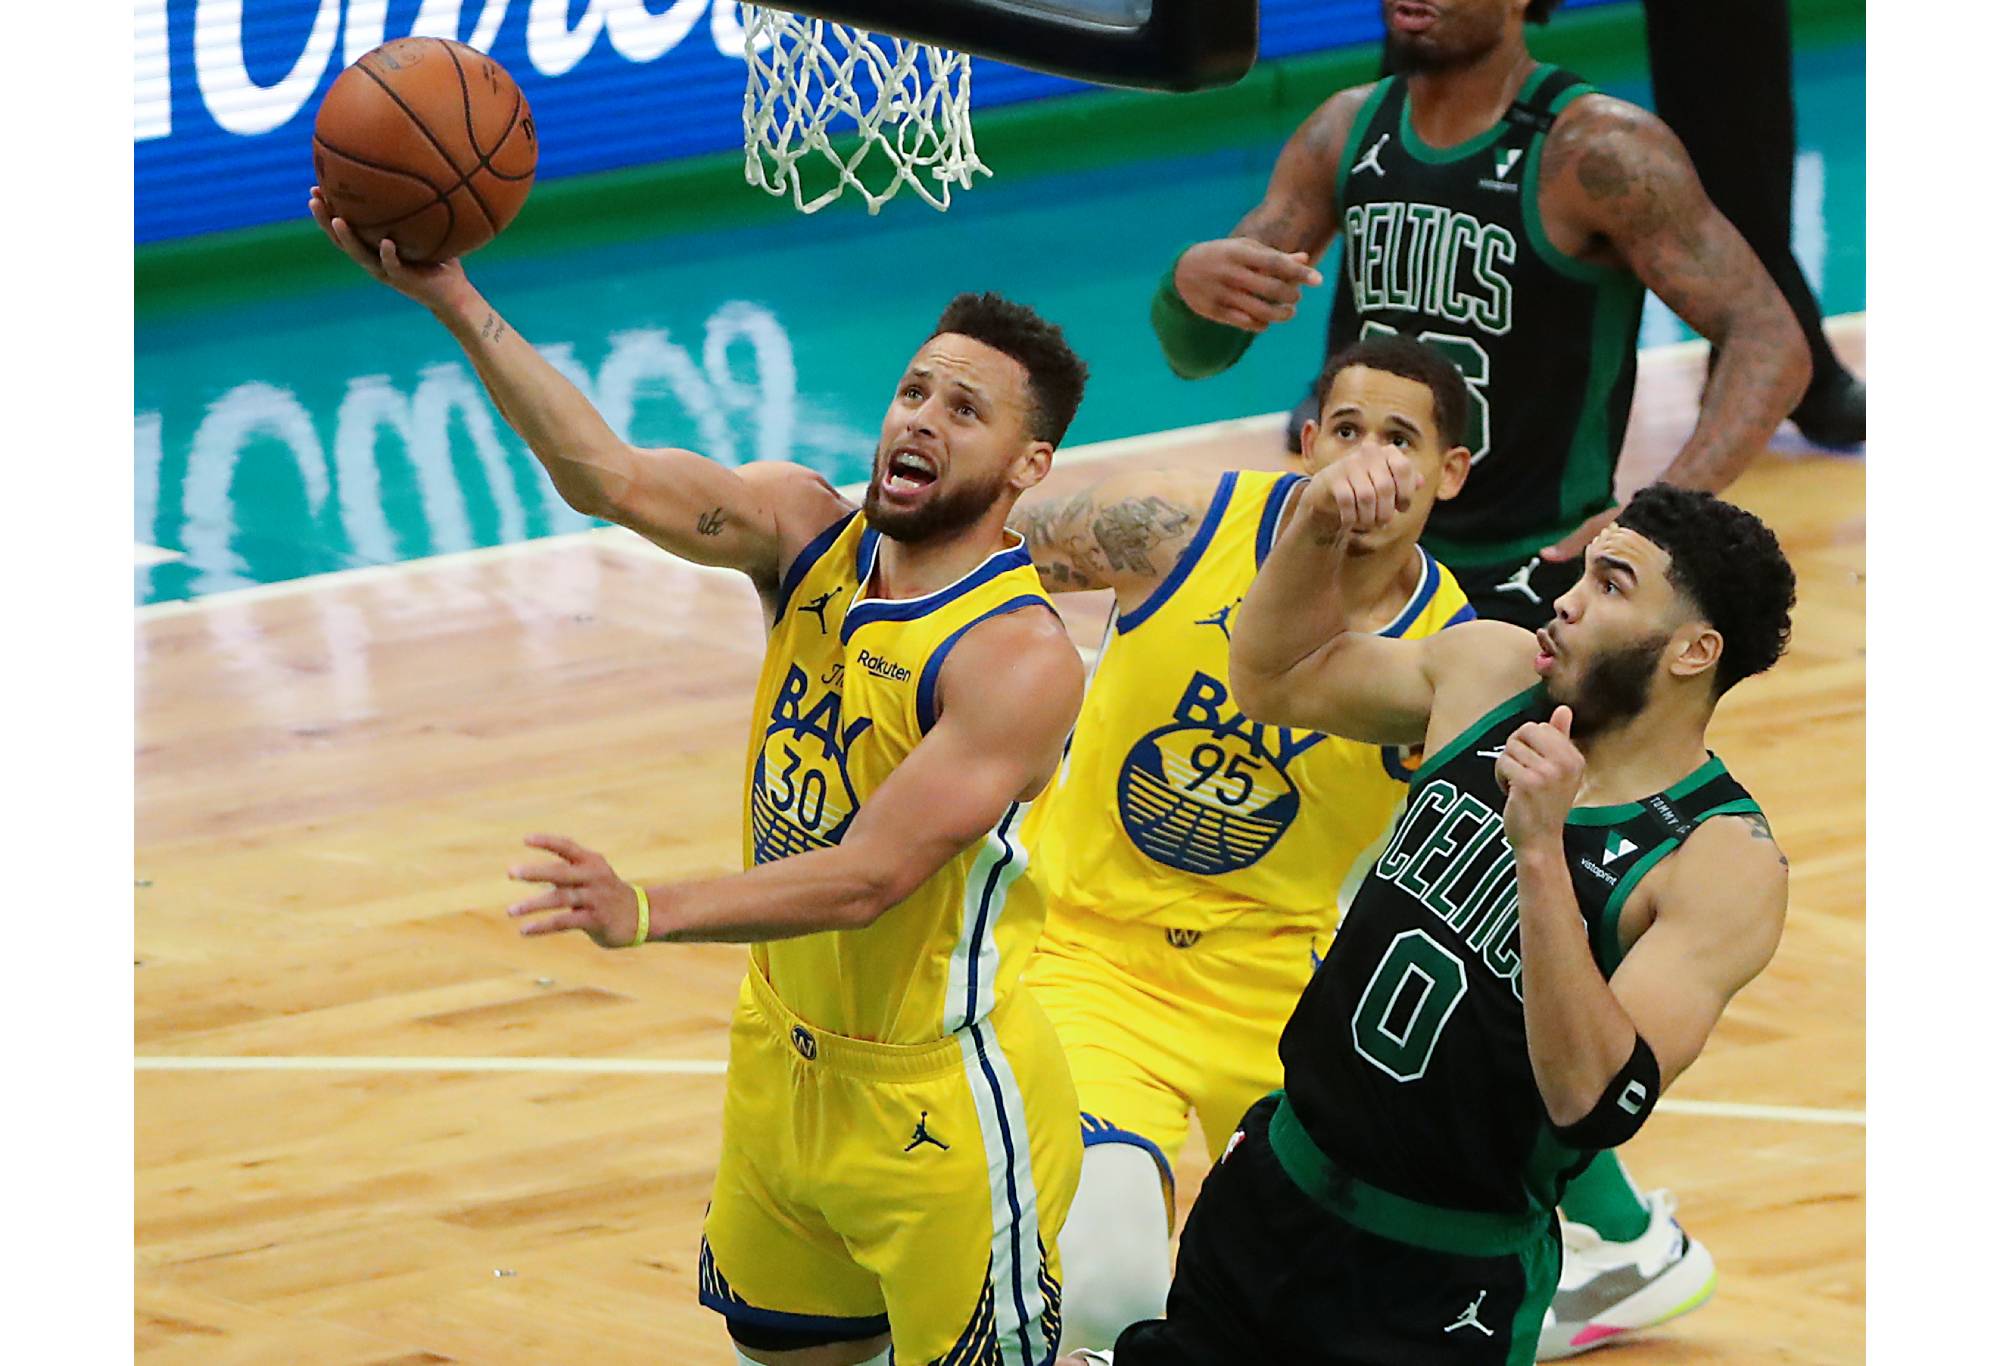 Boston, MA - April 17: Golden State Warriors guard Stephen Curry (30) makes a layup beating Boston Celtics forward Jayson Tatum (0) during third quarter of the NBA action at TD Garden in Boston on April 17, 2021. (Photo by Matthew J. Lee/The Boston Globe via Getty Images)